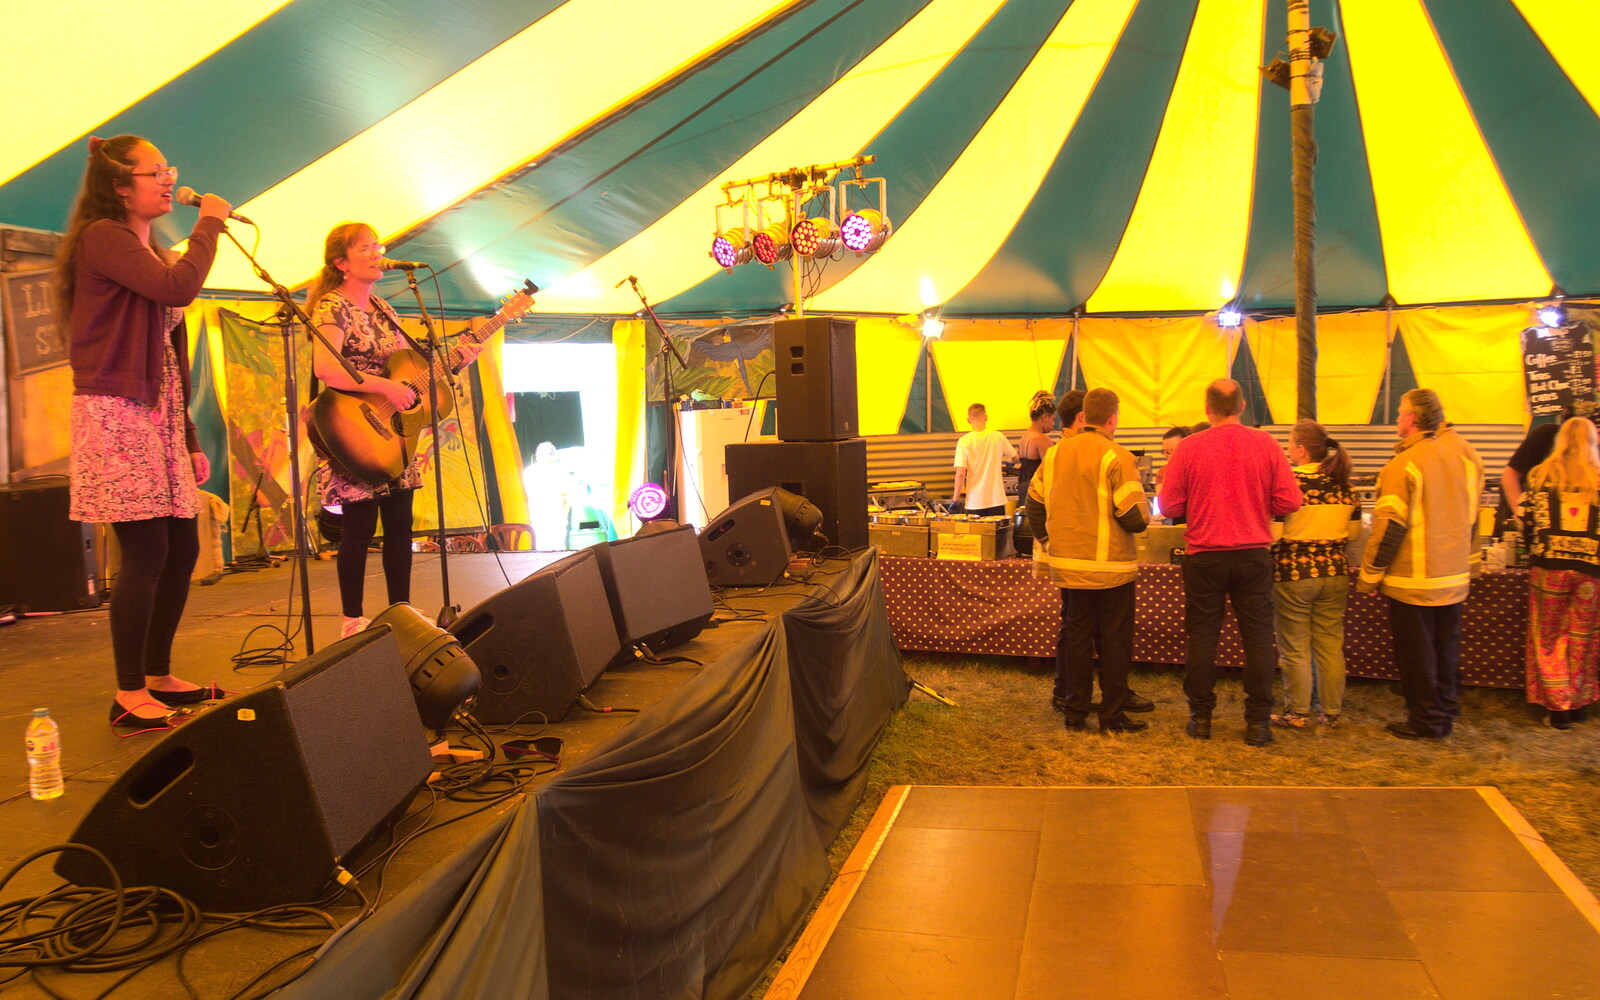 The Rye Sisters play in the café tent from Maui Waui Festival, Hill Farm, Gressenhall, Norfolk - 28th August 2021